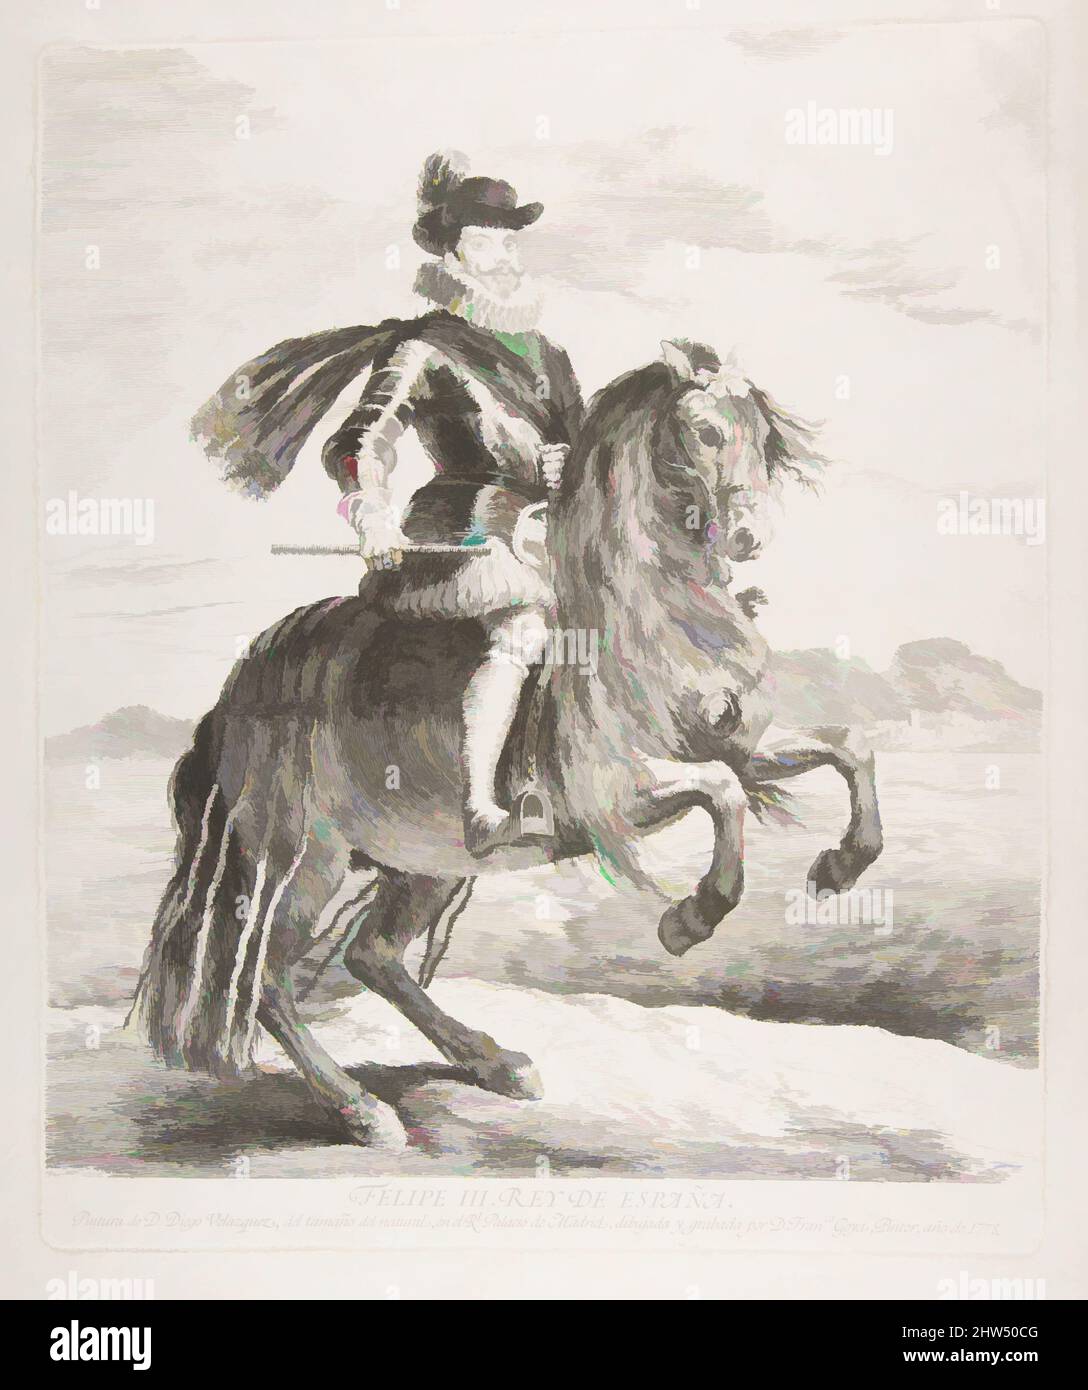 Art inspired by Philip III, King of Spain on horseback, after Velázquez, 1778, Etching and drypoint, Sheet: 16 1/4 × 13 7/16 in. (41.2 × 34.1 cm), Prints, Goya (Francisco de Goya y Lucientes) (Spanish, Fuendetodos 1746–1828 Bordeaux), After Velázquez (Diego Rodríguez de Silva y, Classic works modernized by Artotop with a splash of modernity. Shapes, color and value, eye-catching visual impact on art. Emotions through freedom of artworks in a contemporary way. A timeless message pursuing a wildly creative new direction. Artists turning to the digital medium and creating the Artotop NFT Stock Photo